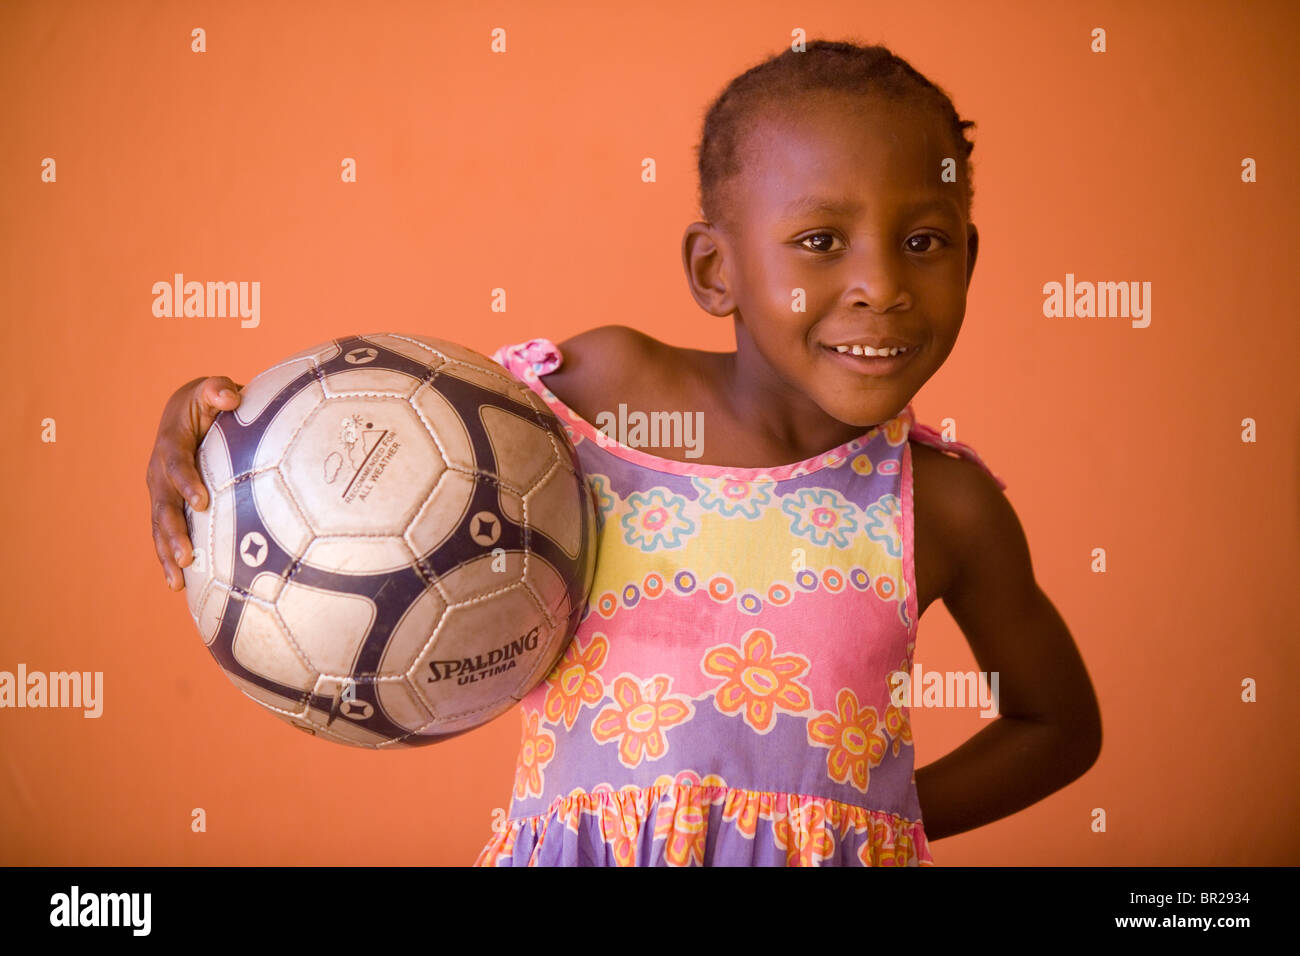 A young girl poses with her new soccer ball she received for her birthday  in Gaborone, Botswana Stock Photo - Alamy